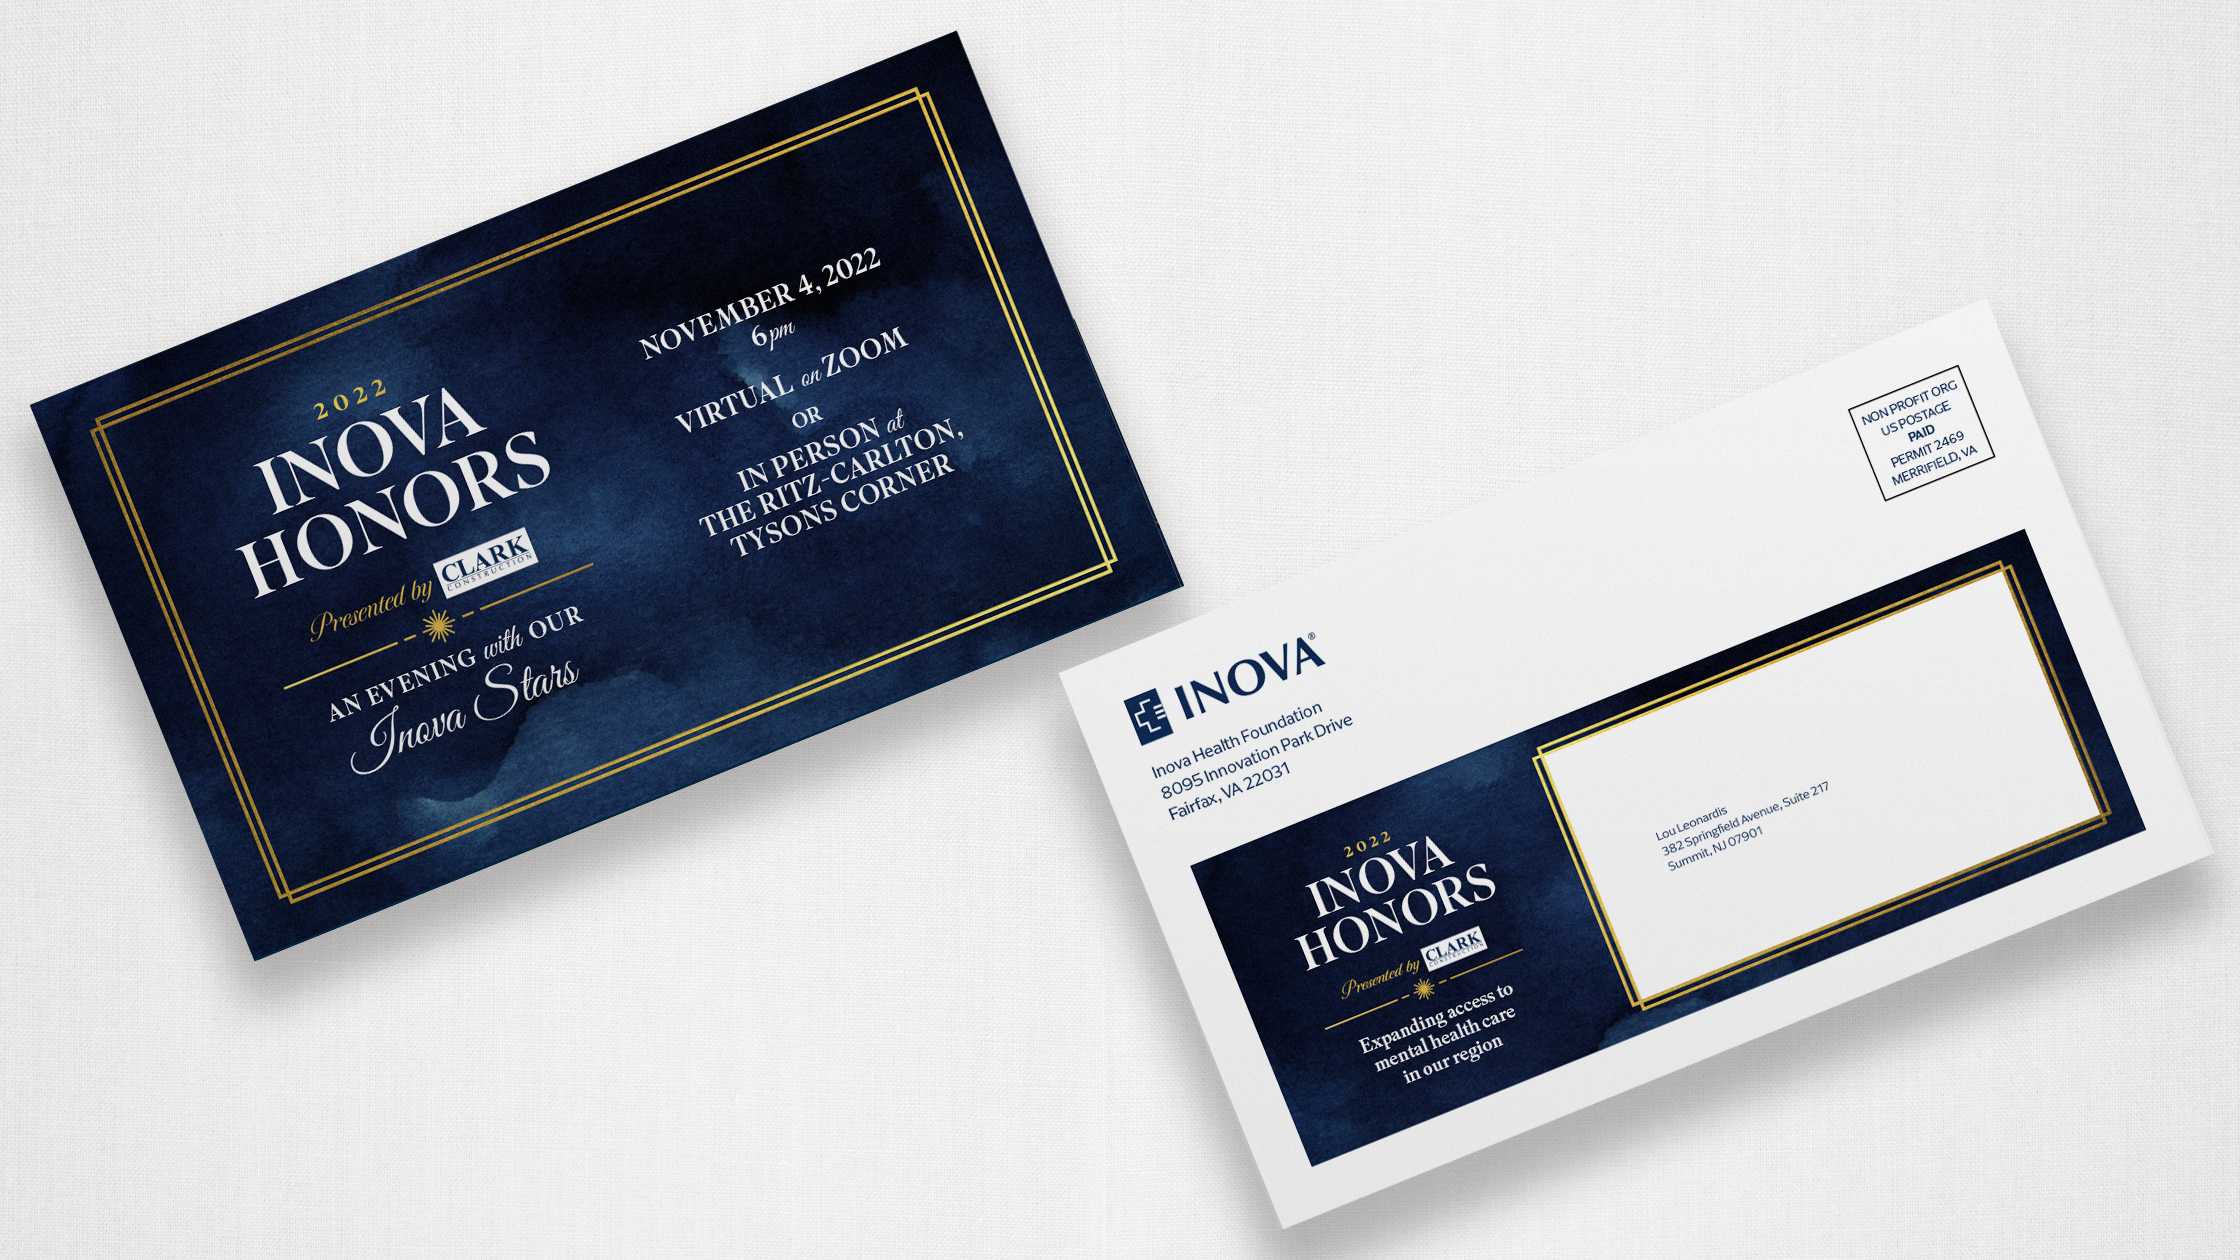 Gala event branding applied to the front and back panels of a self-mailer for the Inova Honors Gala.